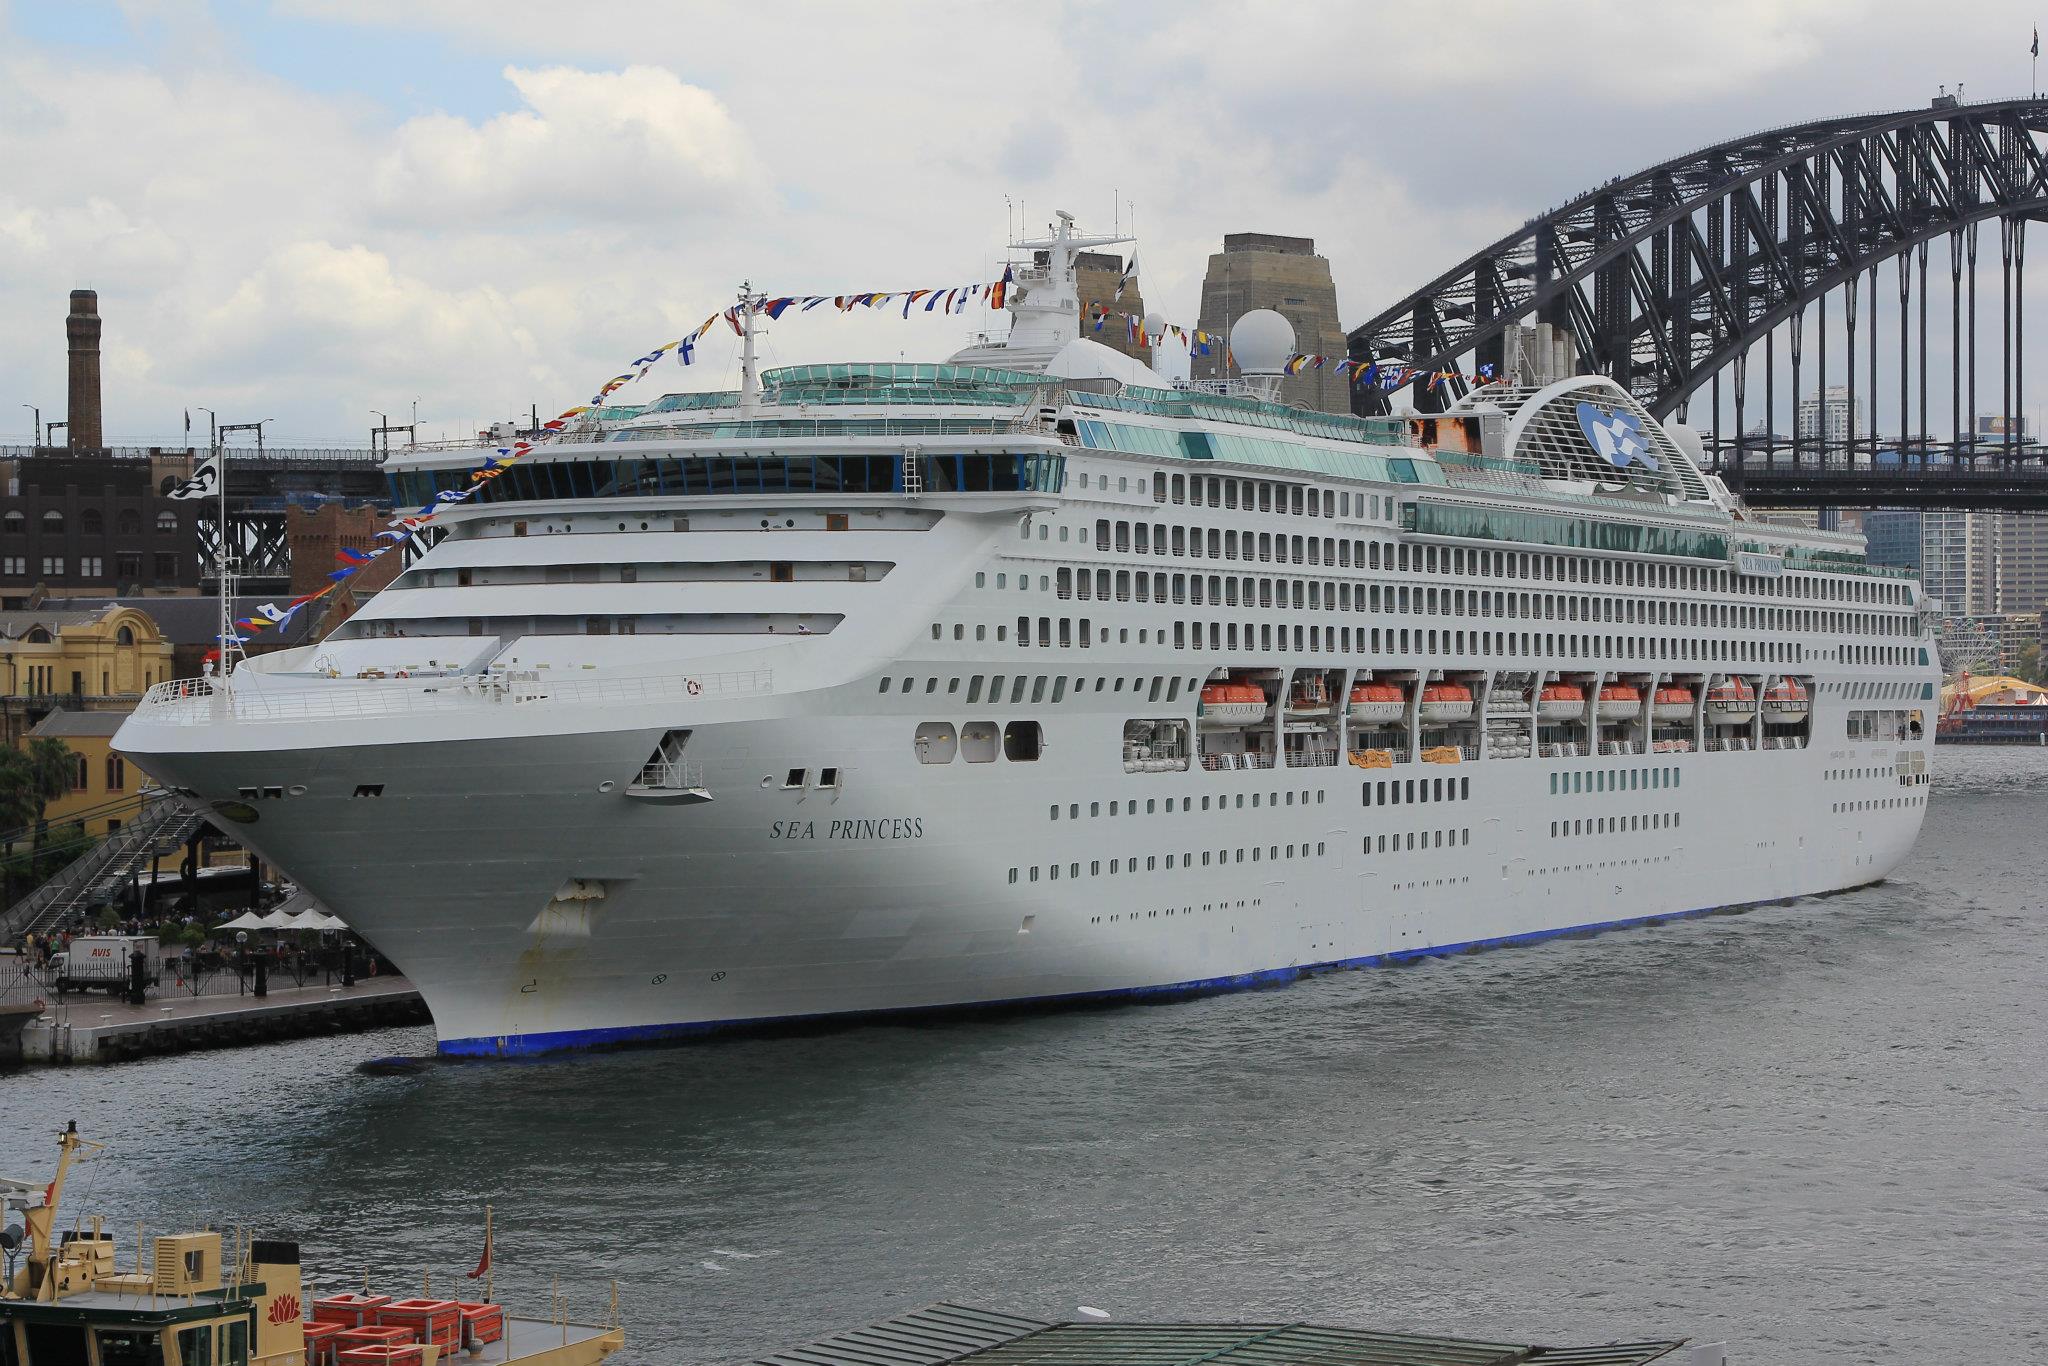 Canadians attempt to smuggle 95kg of cocaine on Sea Princess